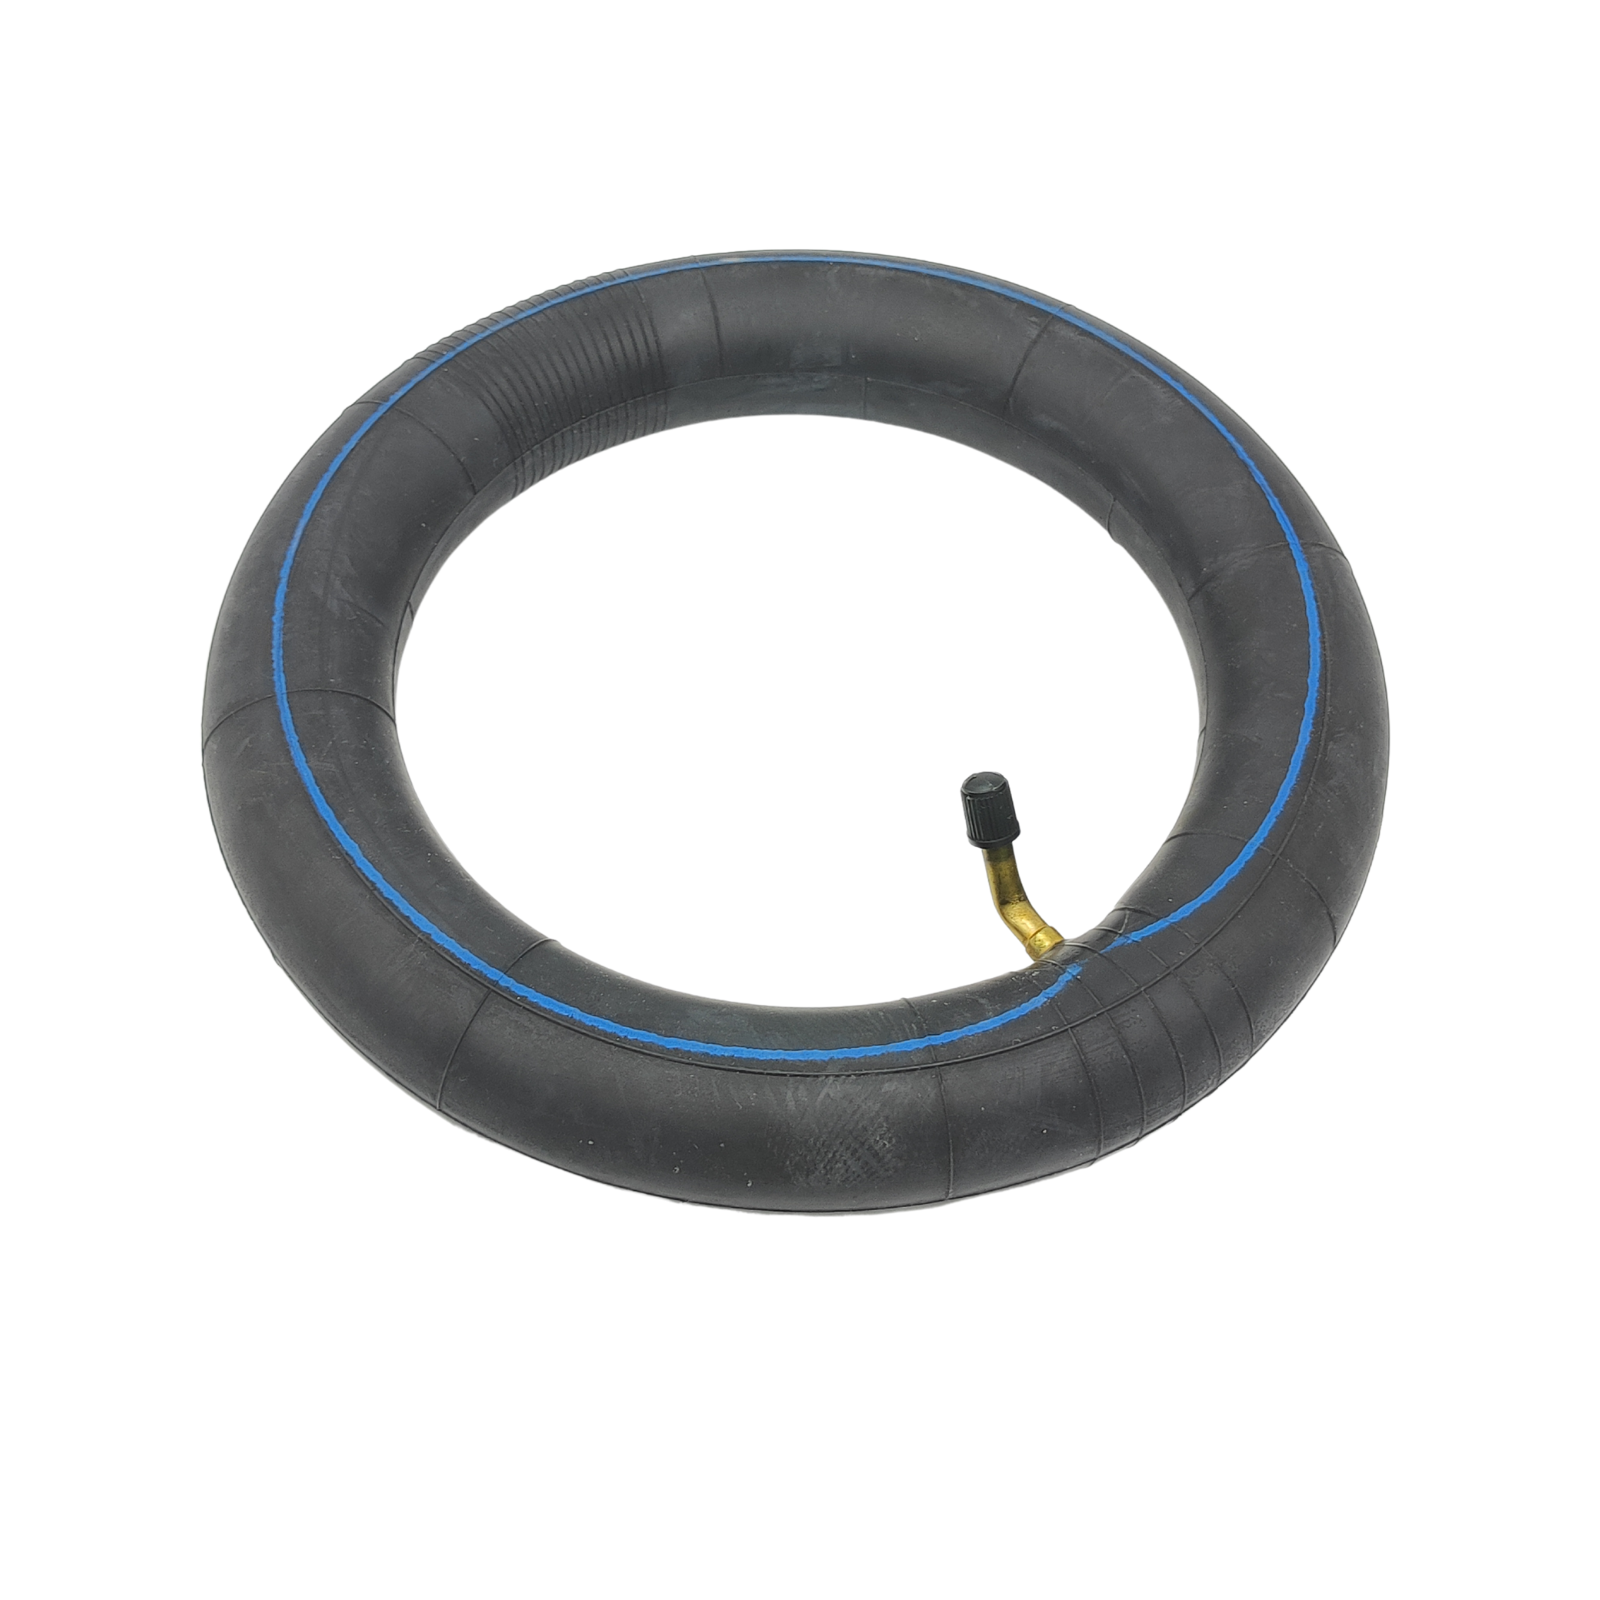 10x2.125 Inner Tube & Tyre For Ninebot-Segway Electric-Scooter  F20/F25/F30/F40